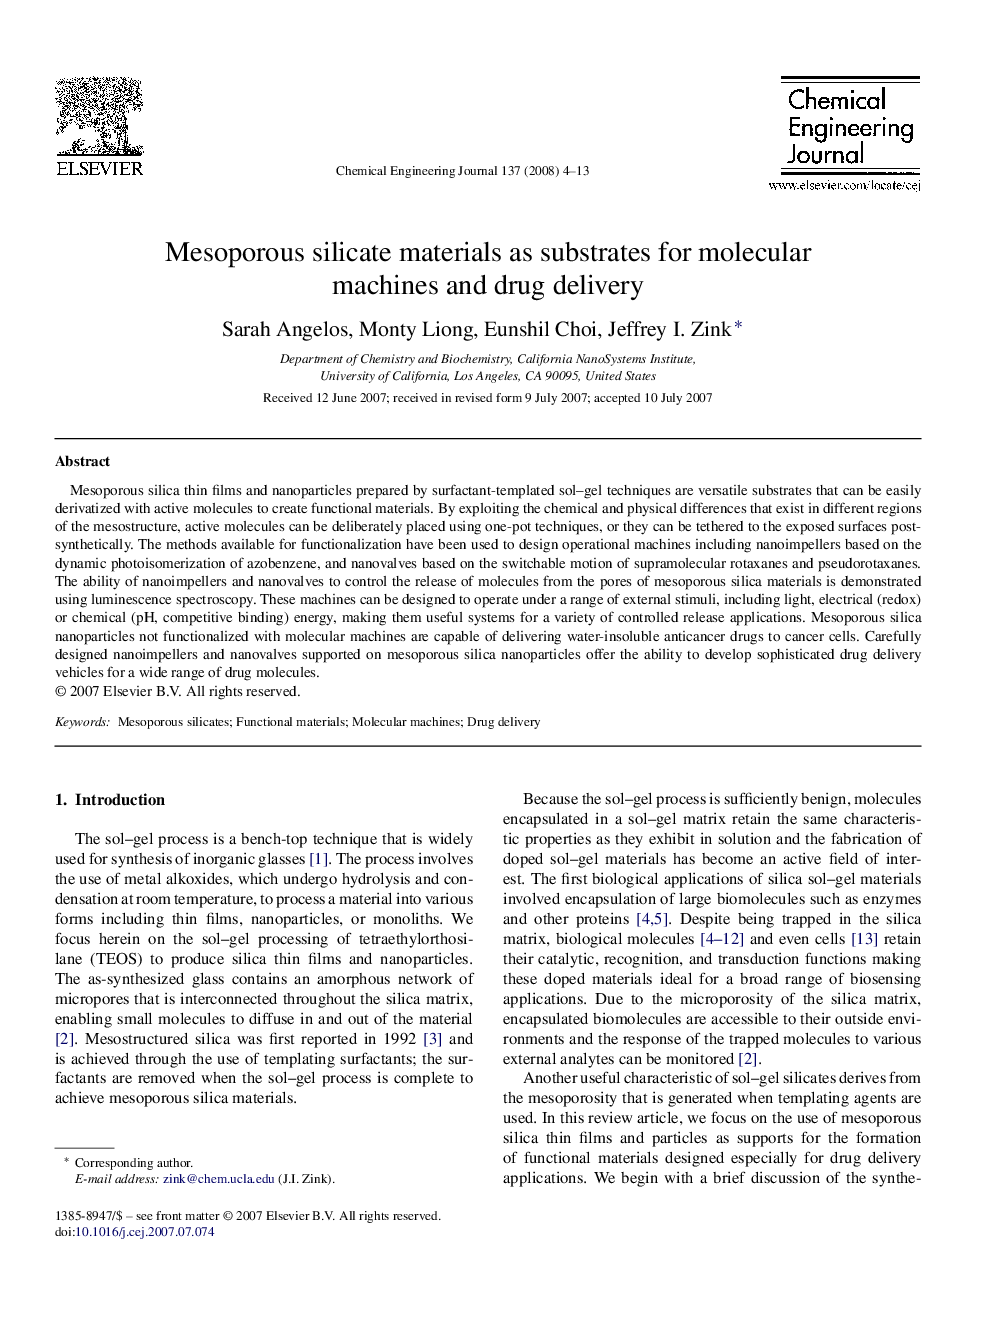 Mesoporous silicate materials as substrates for molecular machines and drug delivery